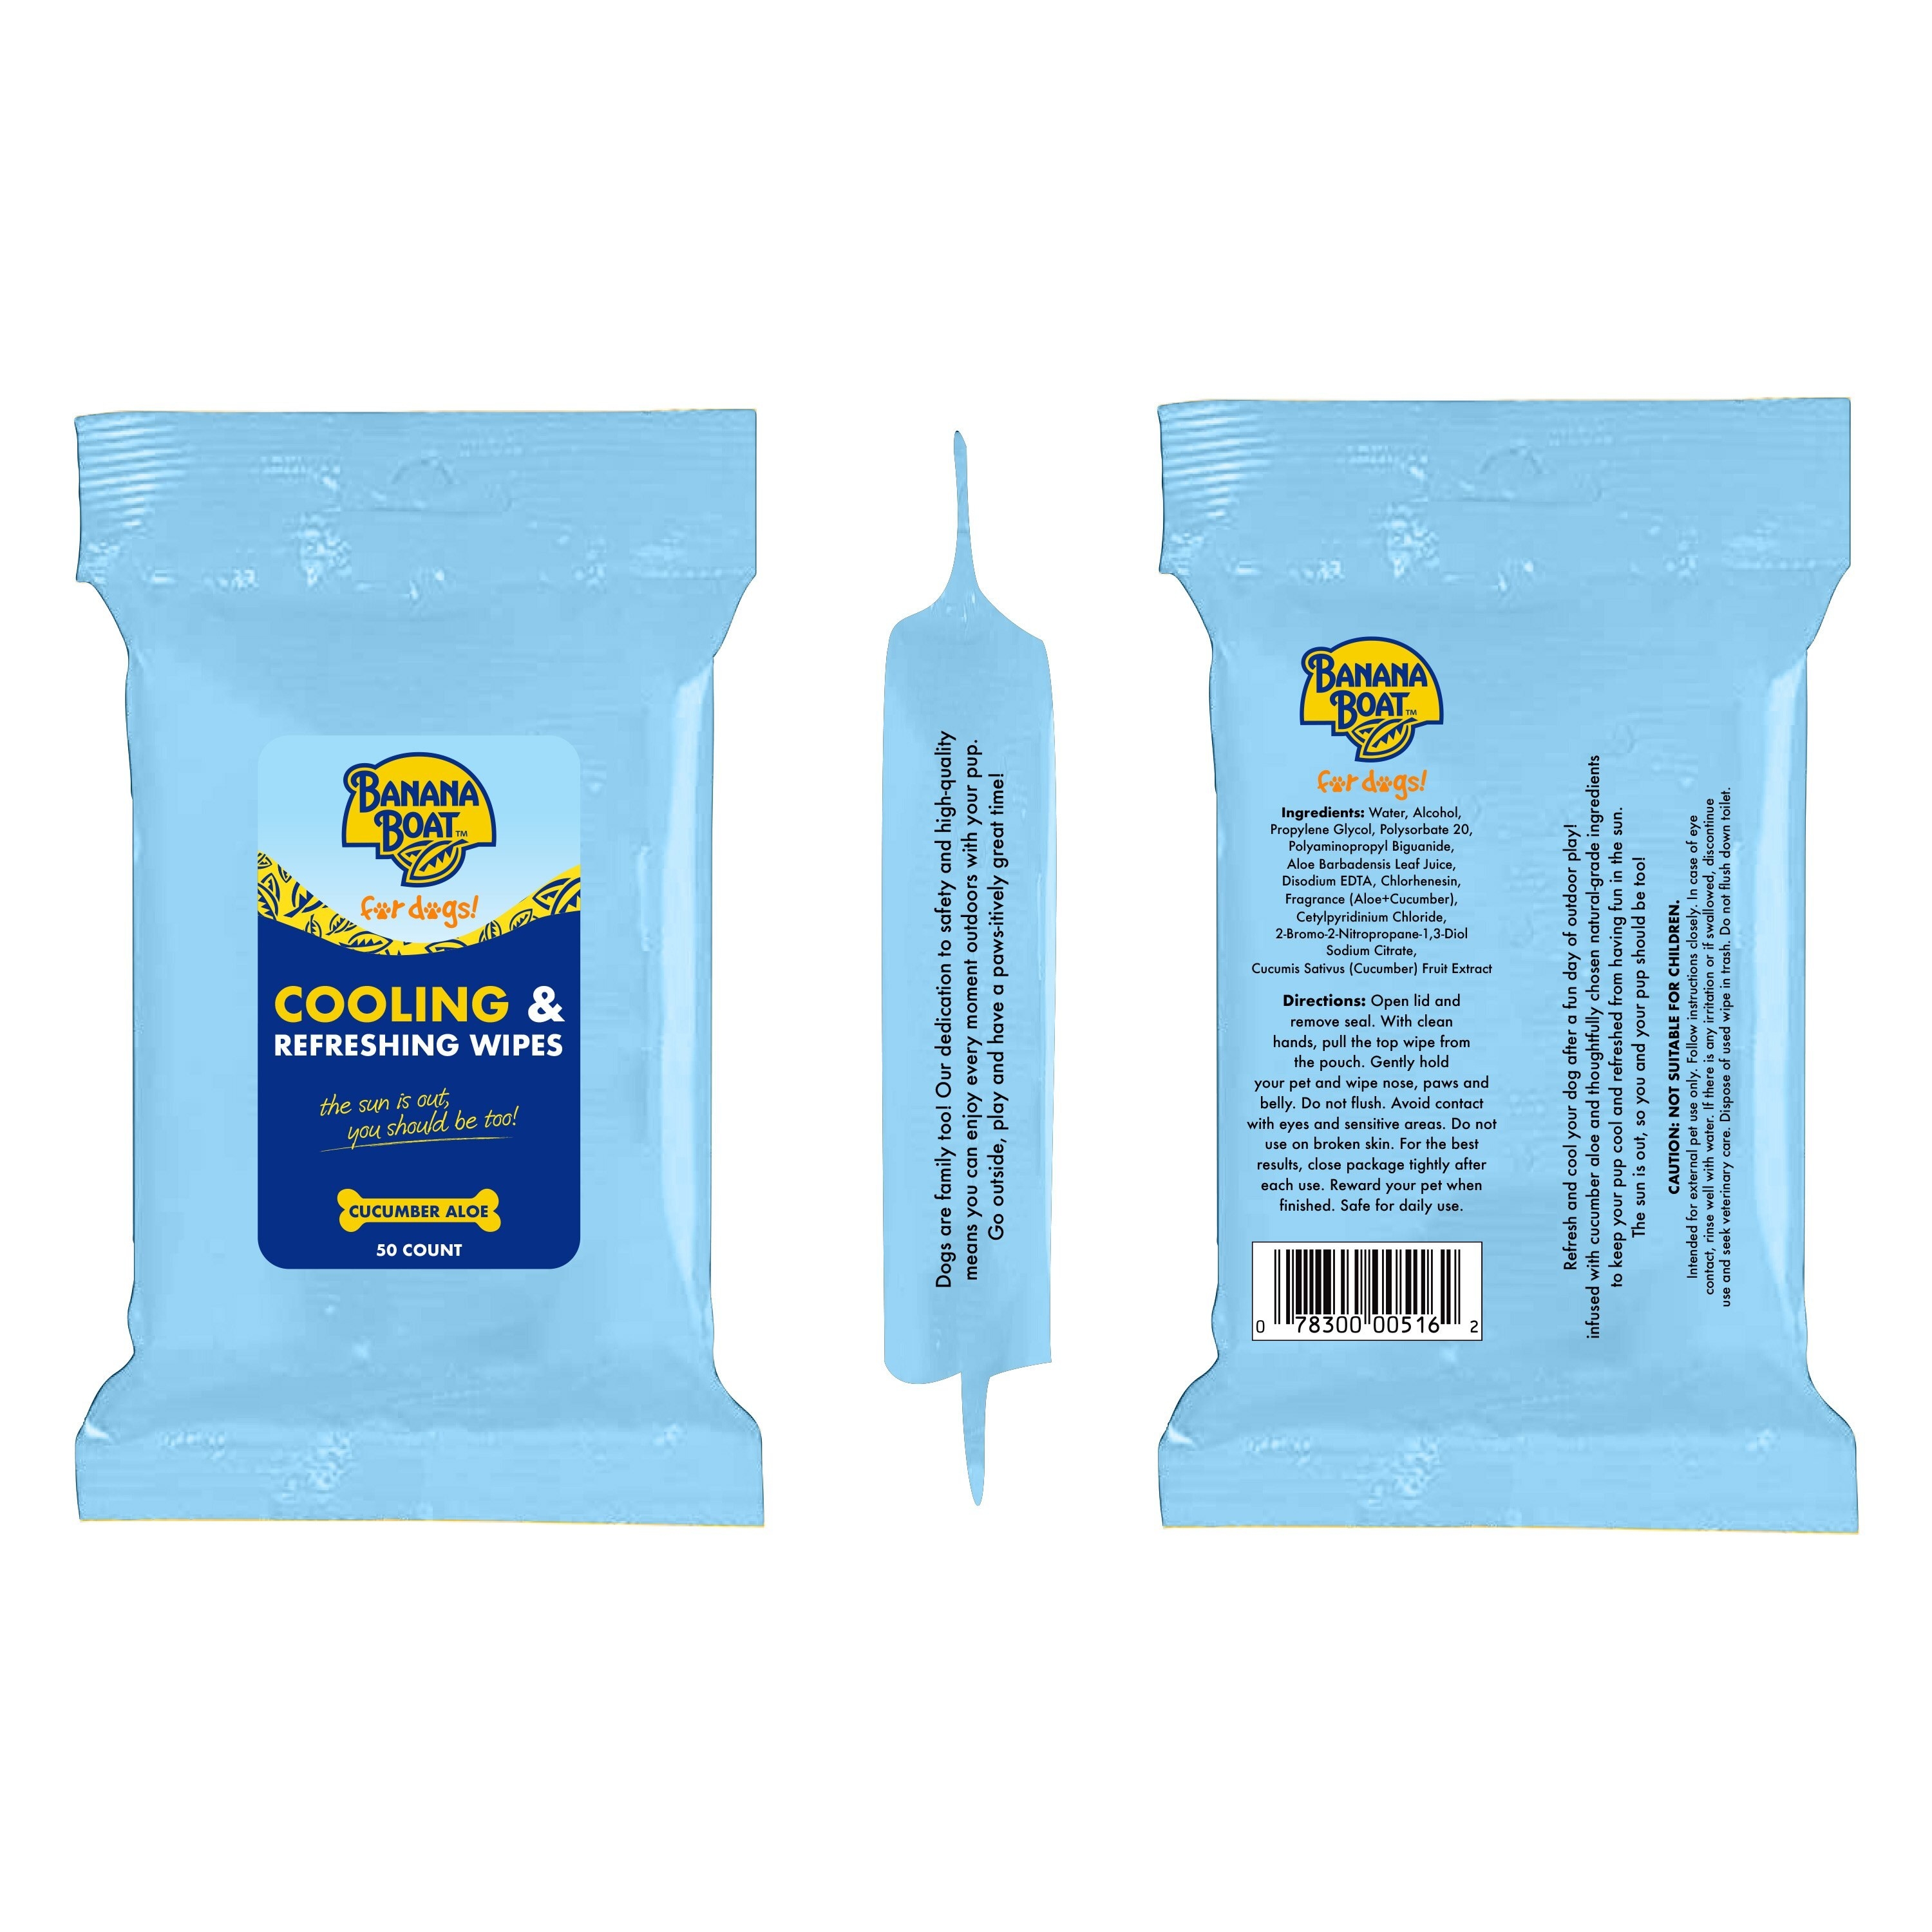 banana boat cooling and refreshing wipes for dogs